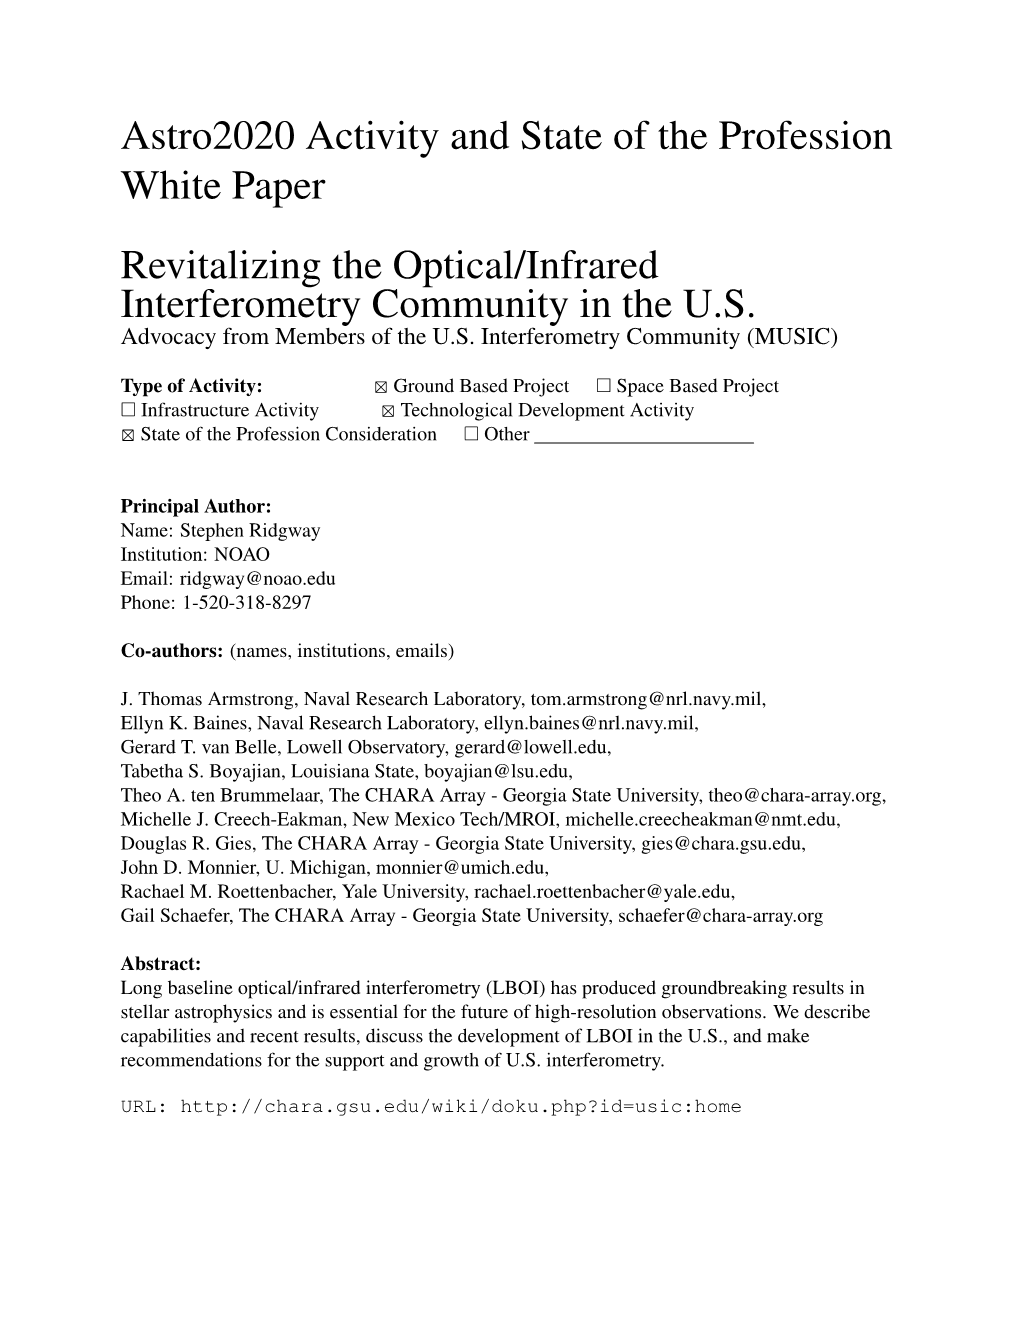 Astro2020 Activity and State of the Profession White Paper Revitalizing the Optical/Infrared Interferometry Community in the U.S